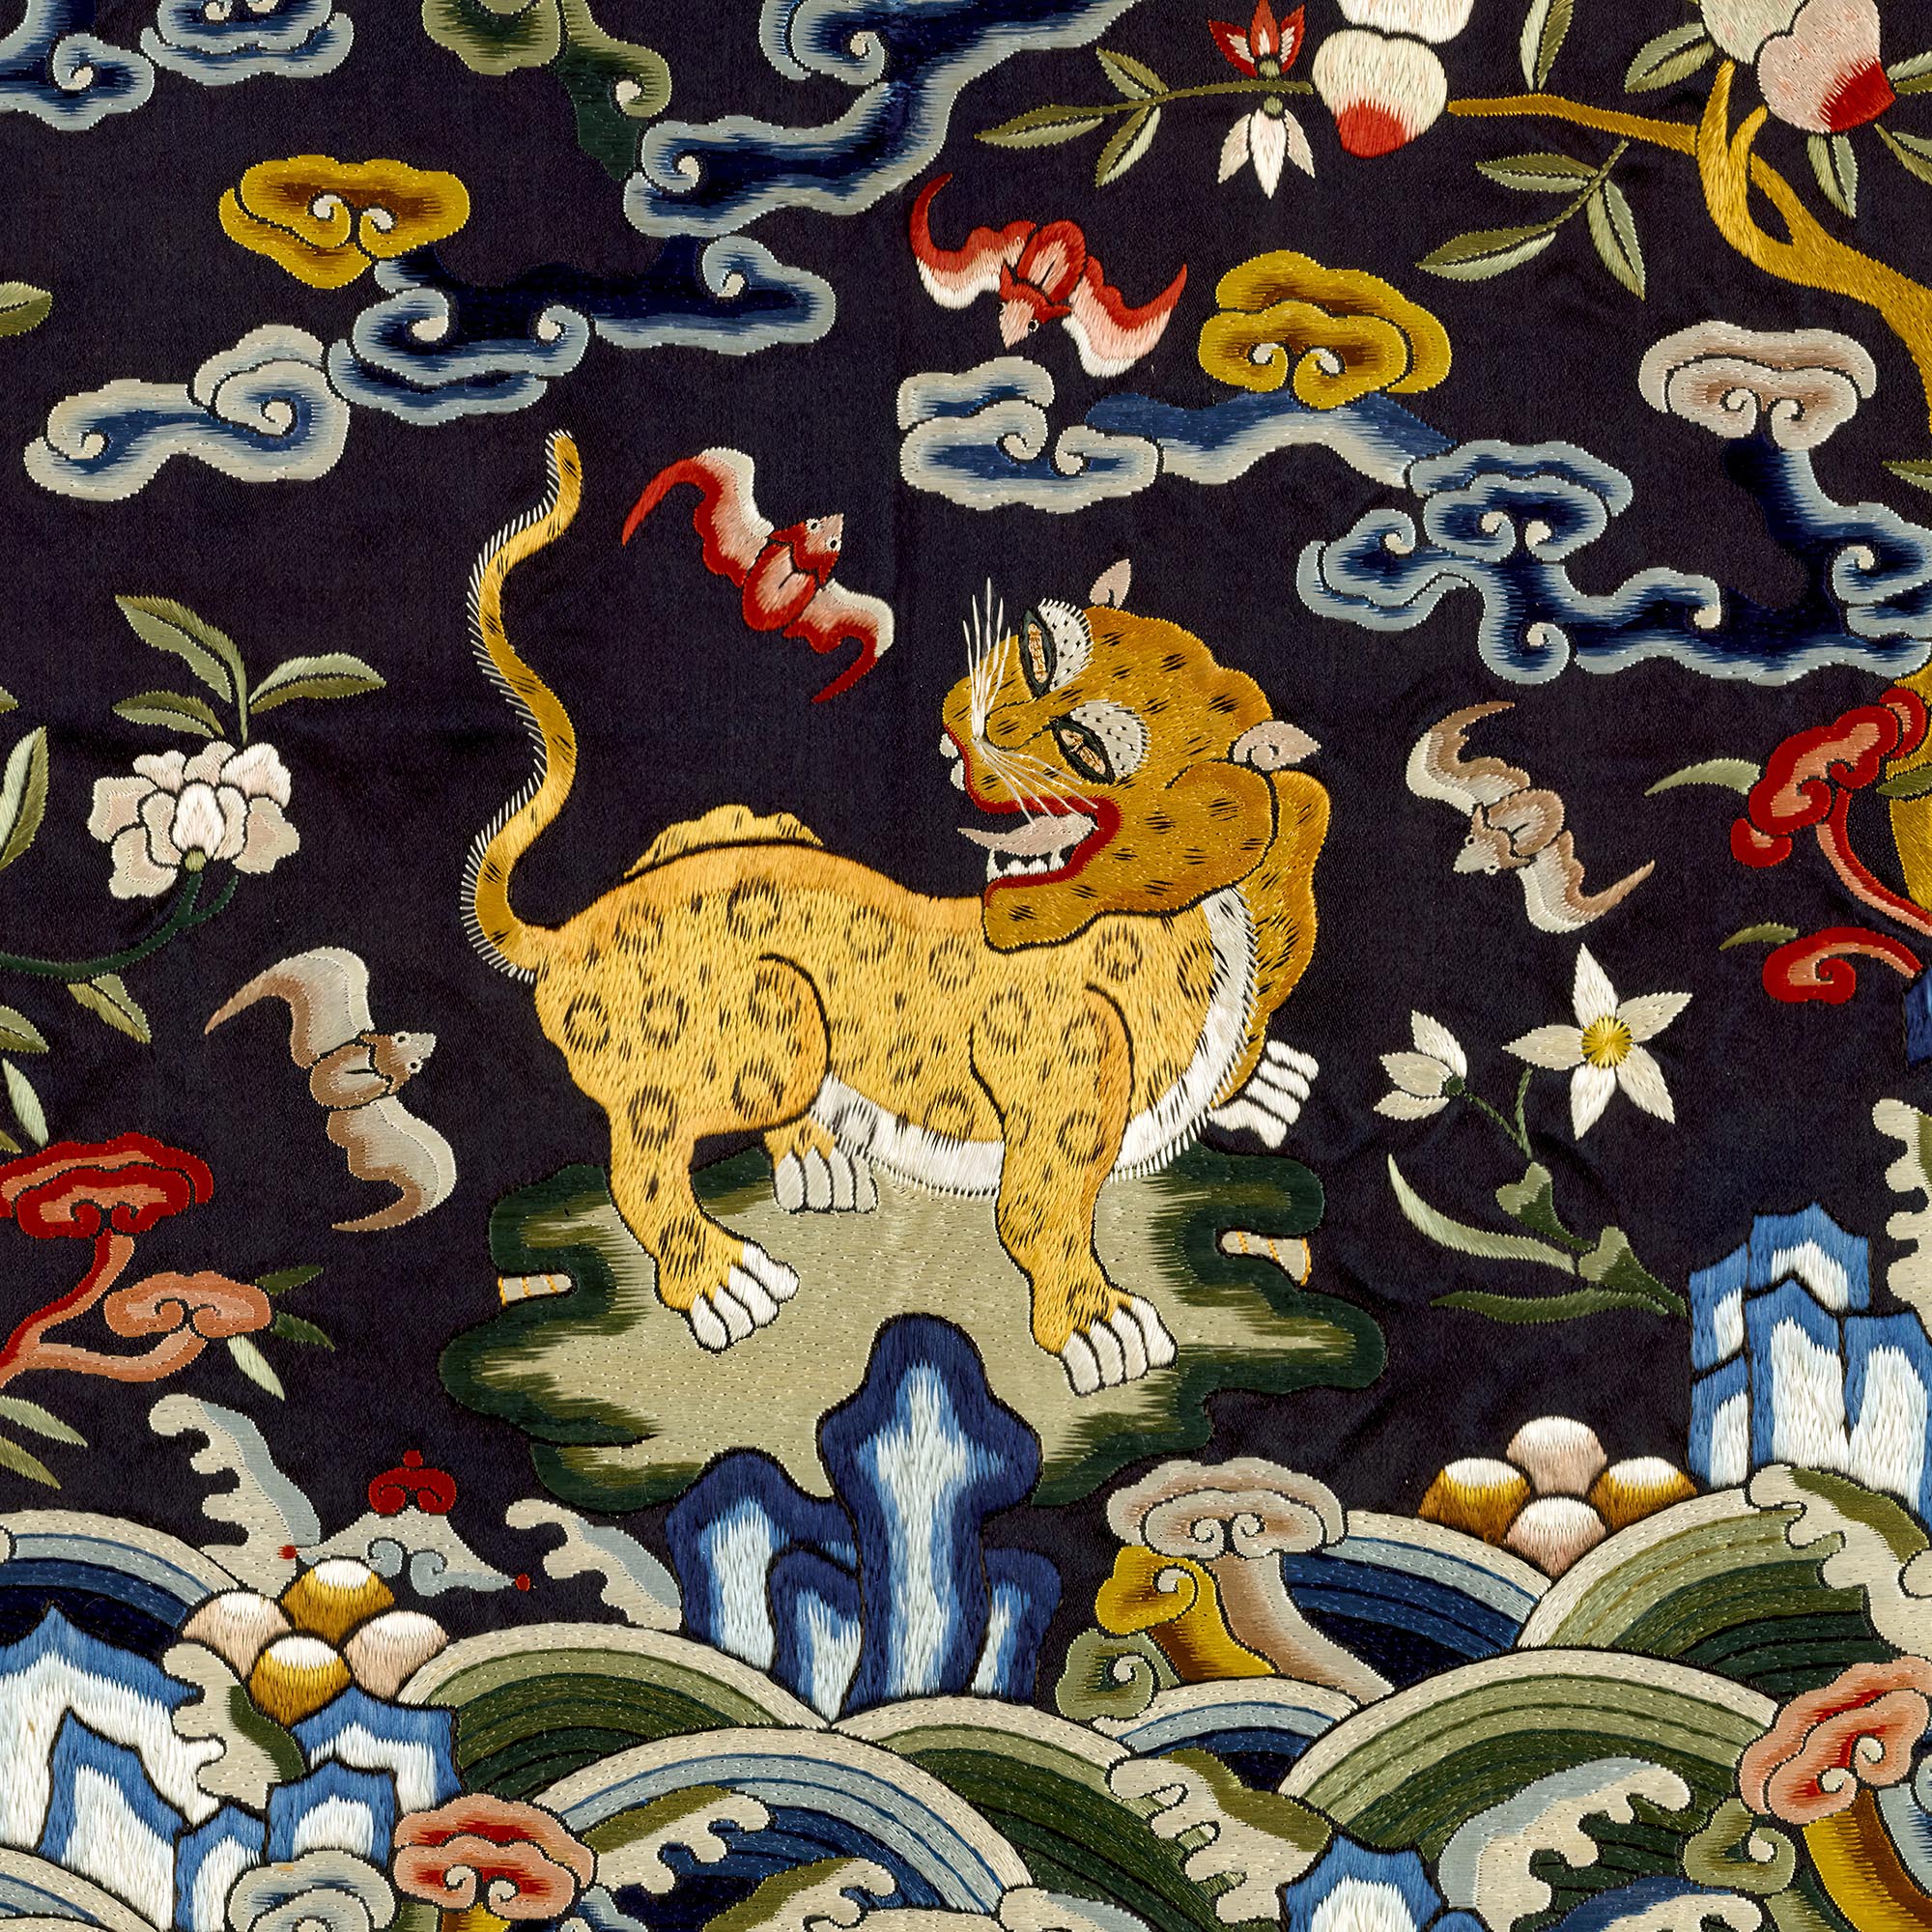 giclee 6"x6" Chinese Silk Embroidery Leopard Panther Tiger Mandarin Square Qing Dynasty, Antique Wall Art Decor Ornate Vintage Fine Art Print